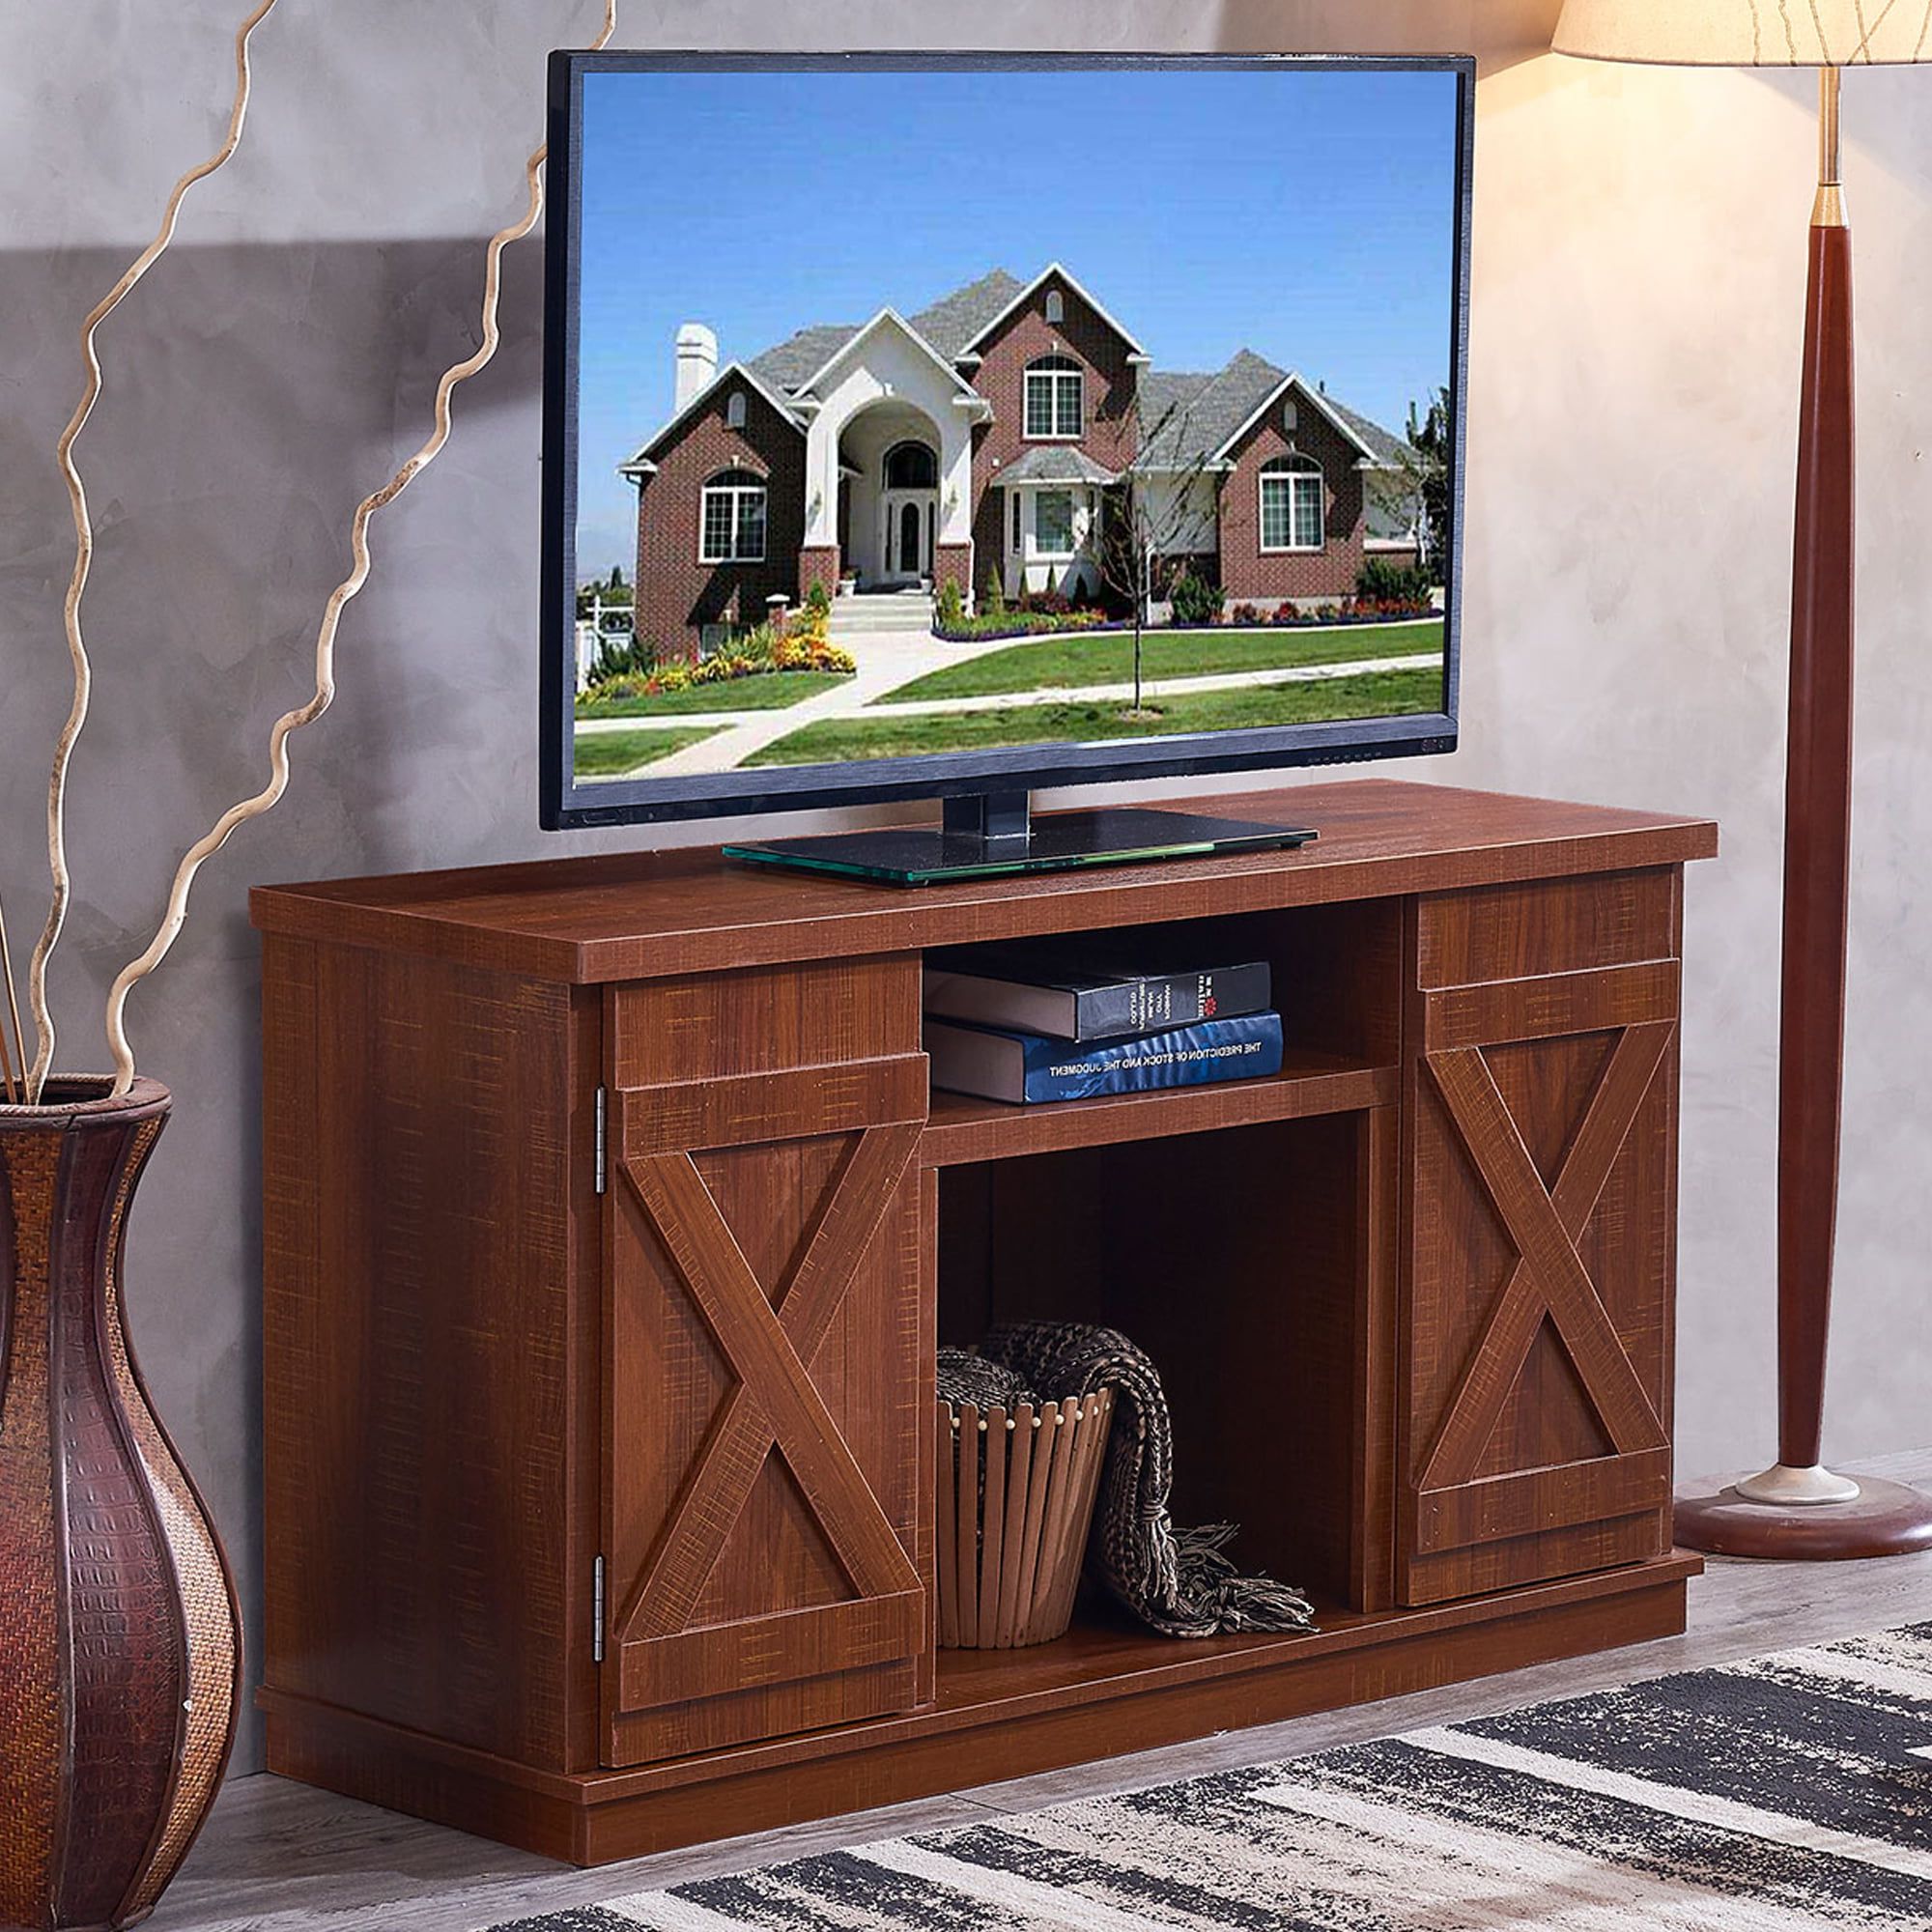 Most Recently Released Harper&bright Designs Wood Tv Stand Cabinet Entertainment Media Console For Wide Entertainment Centers (View 13 of 15)